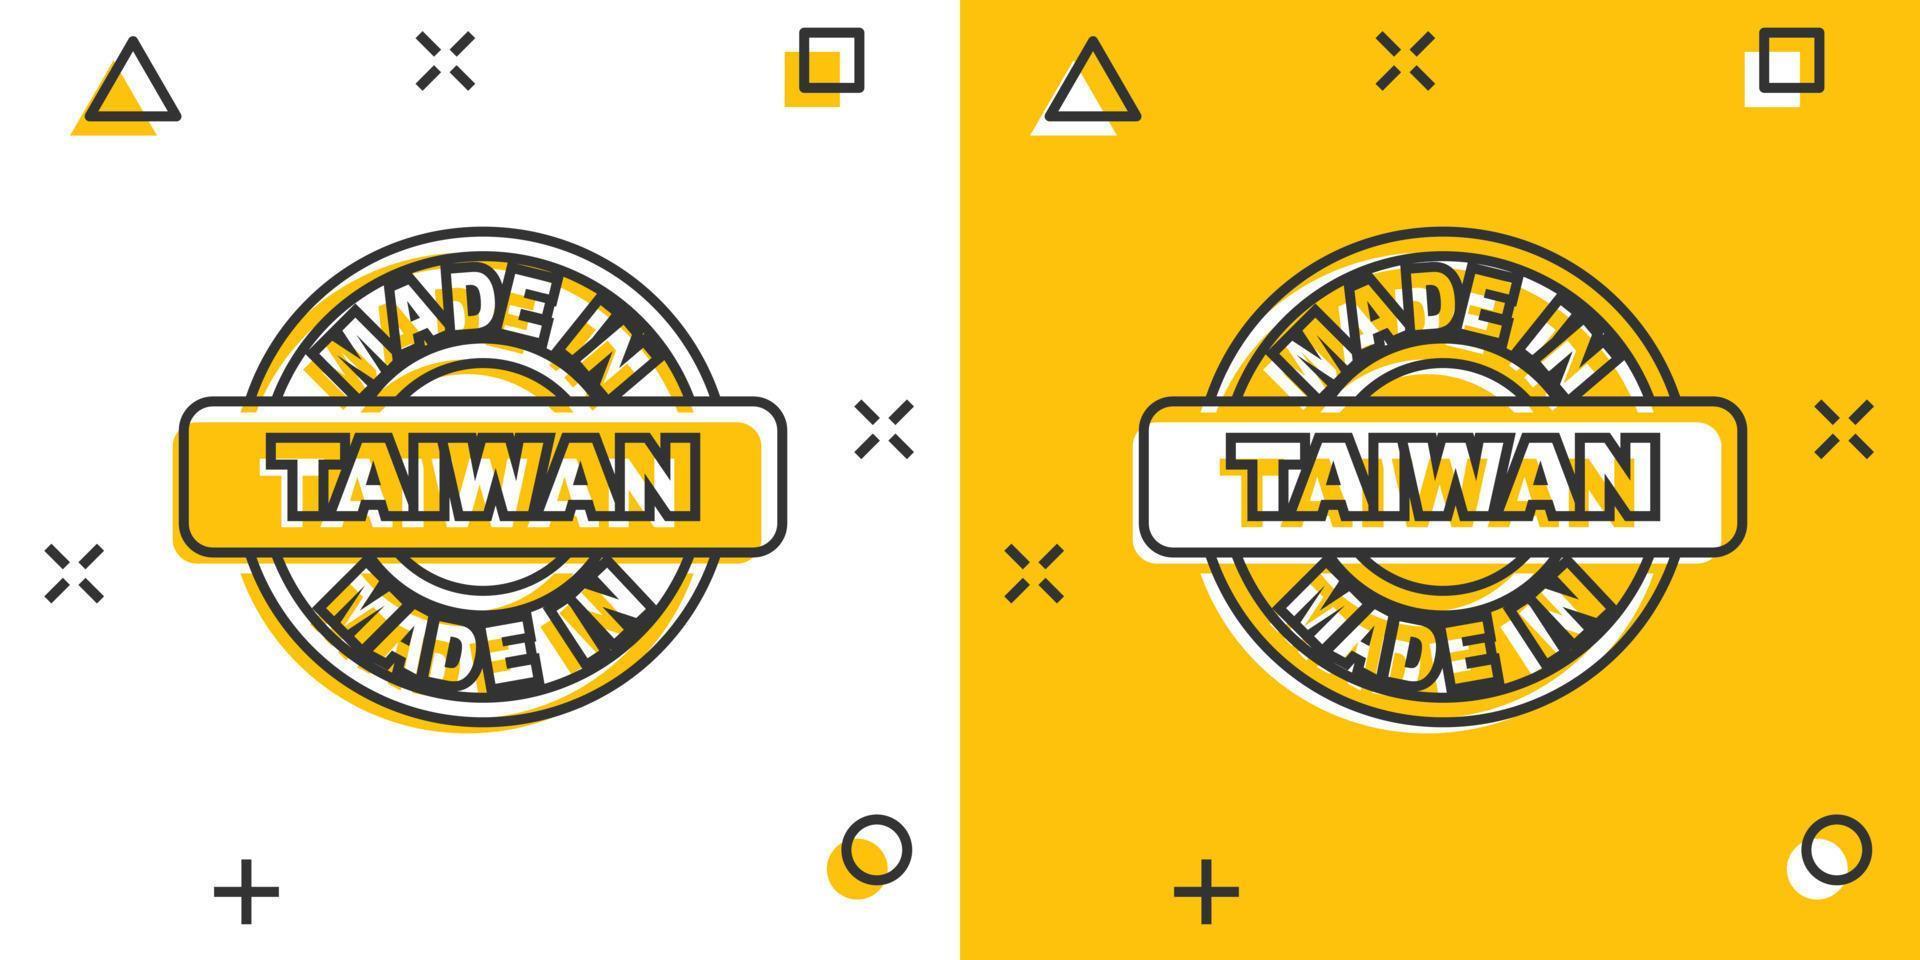 Cartoon made in Taiwan icon in comic style. Manufactured illustration pictogram. Produce sign splash business concept. vector